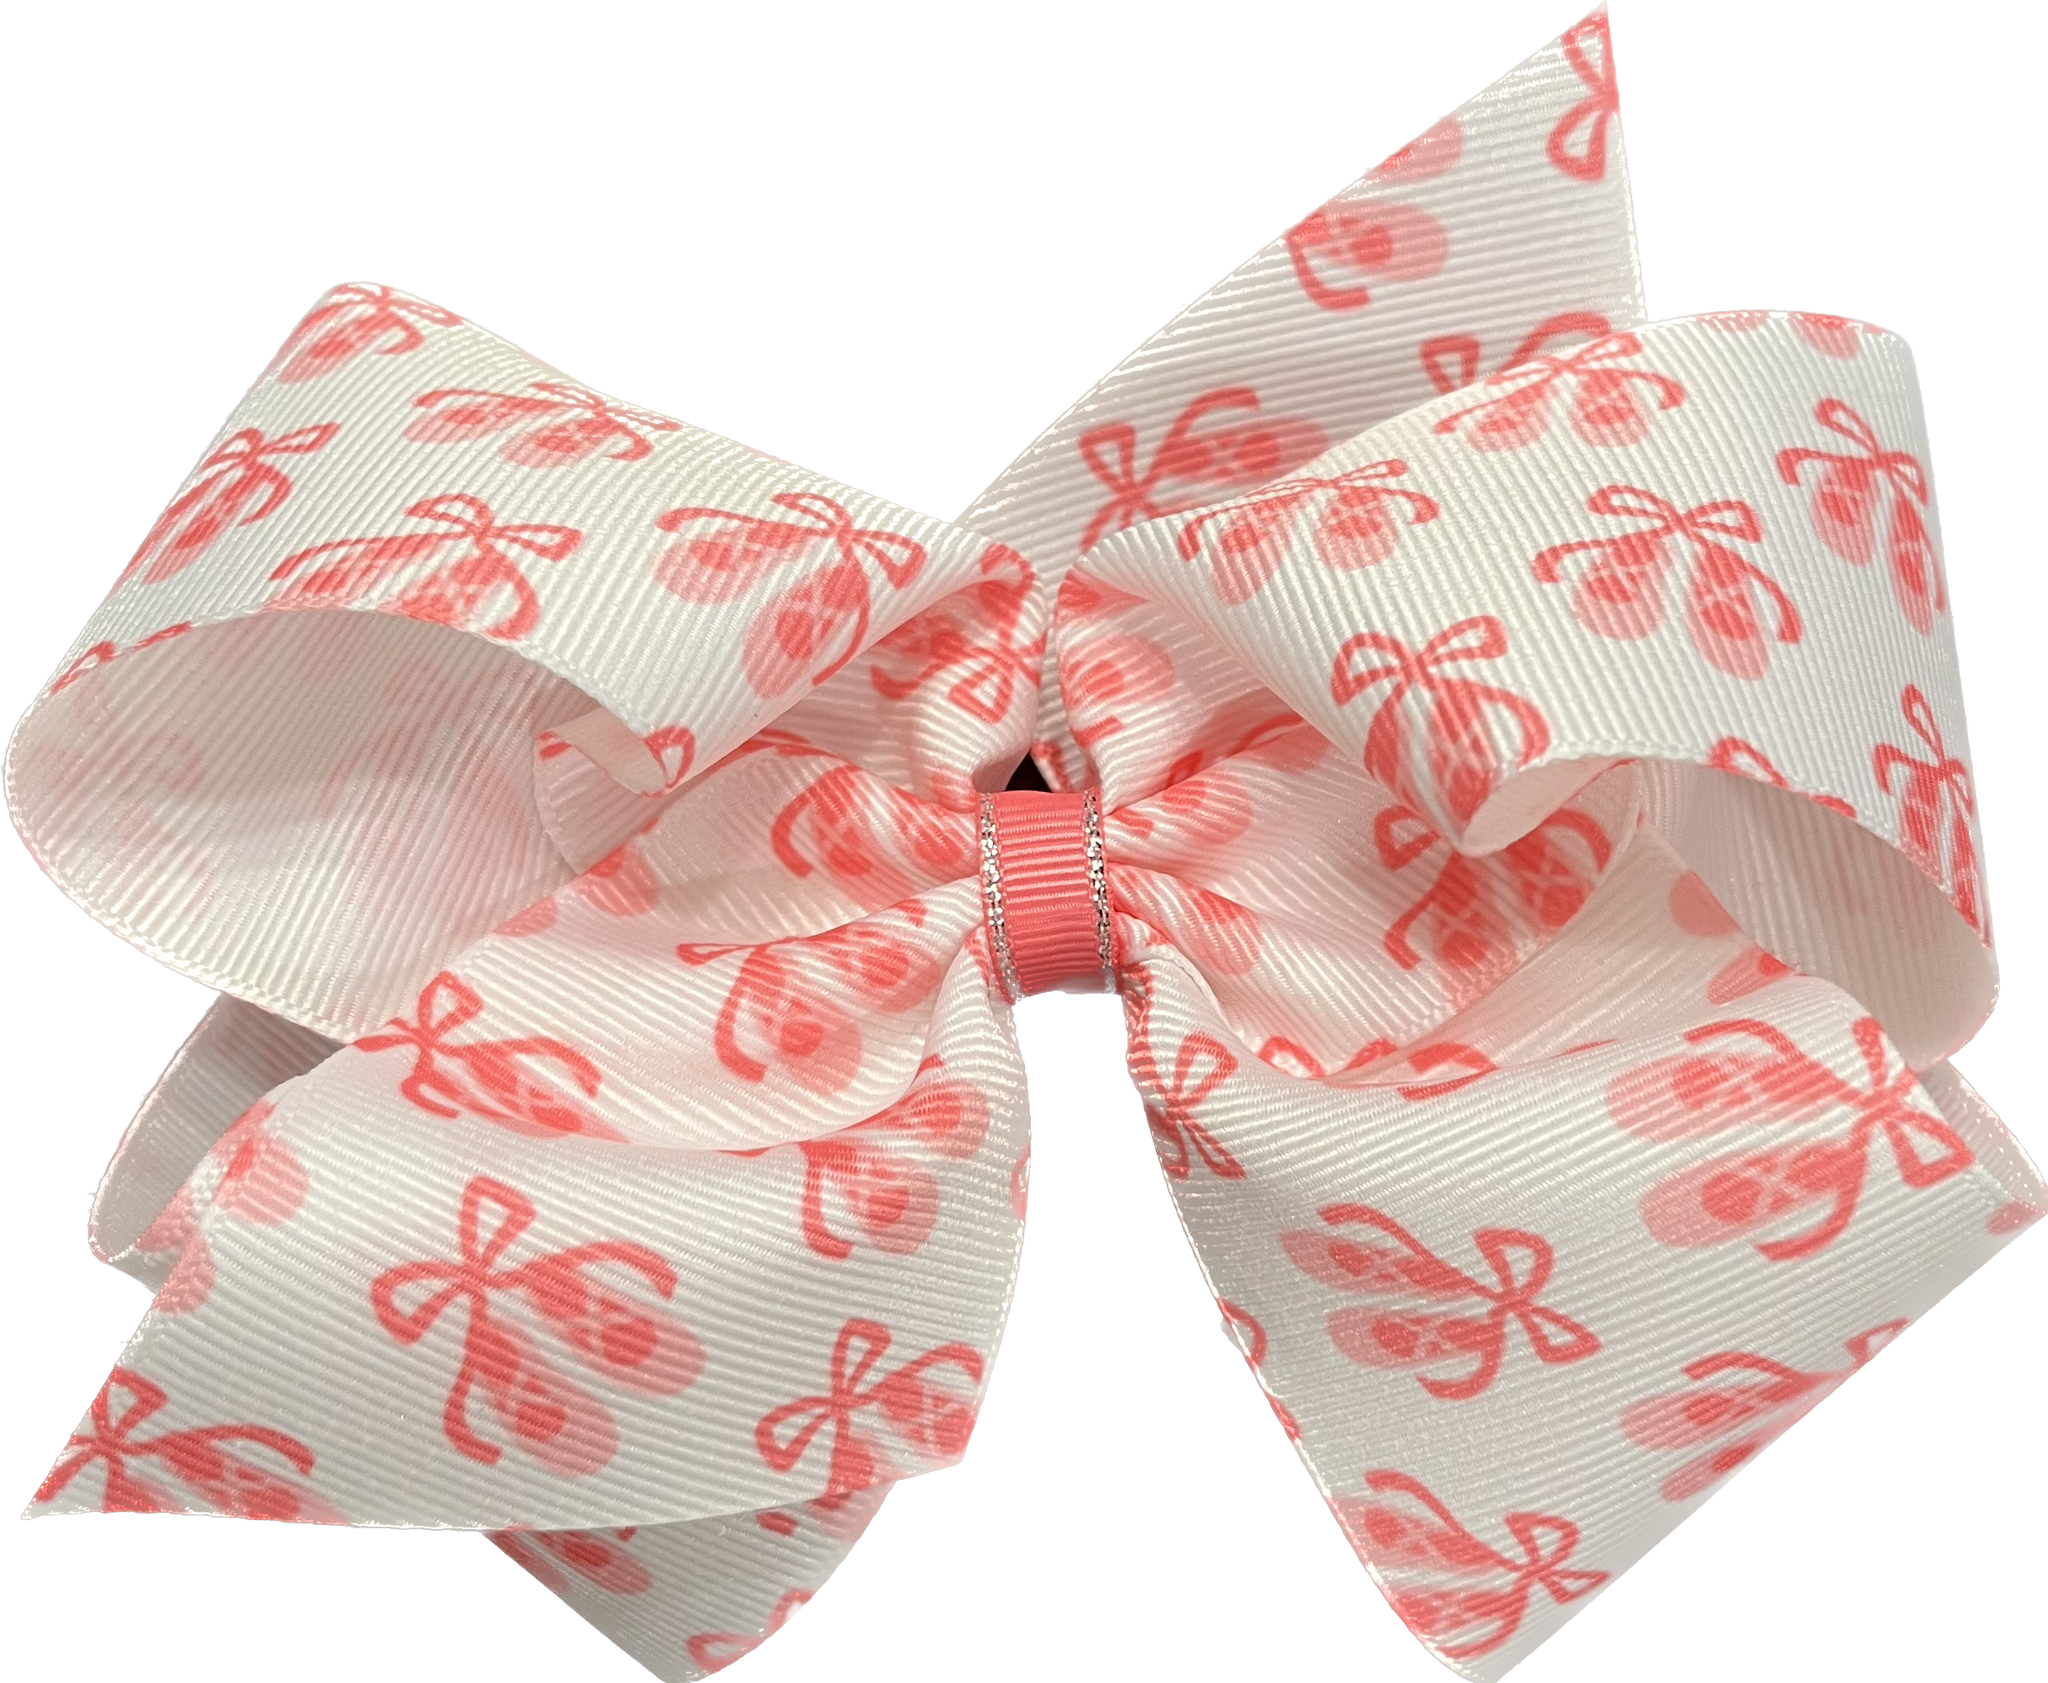 Wee Ones Ballet Hair Bow - King Size